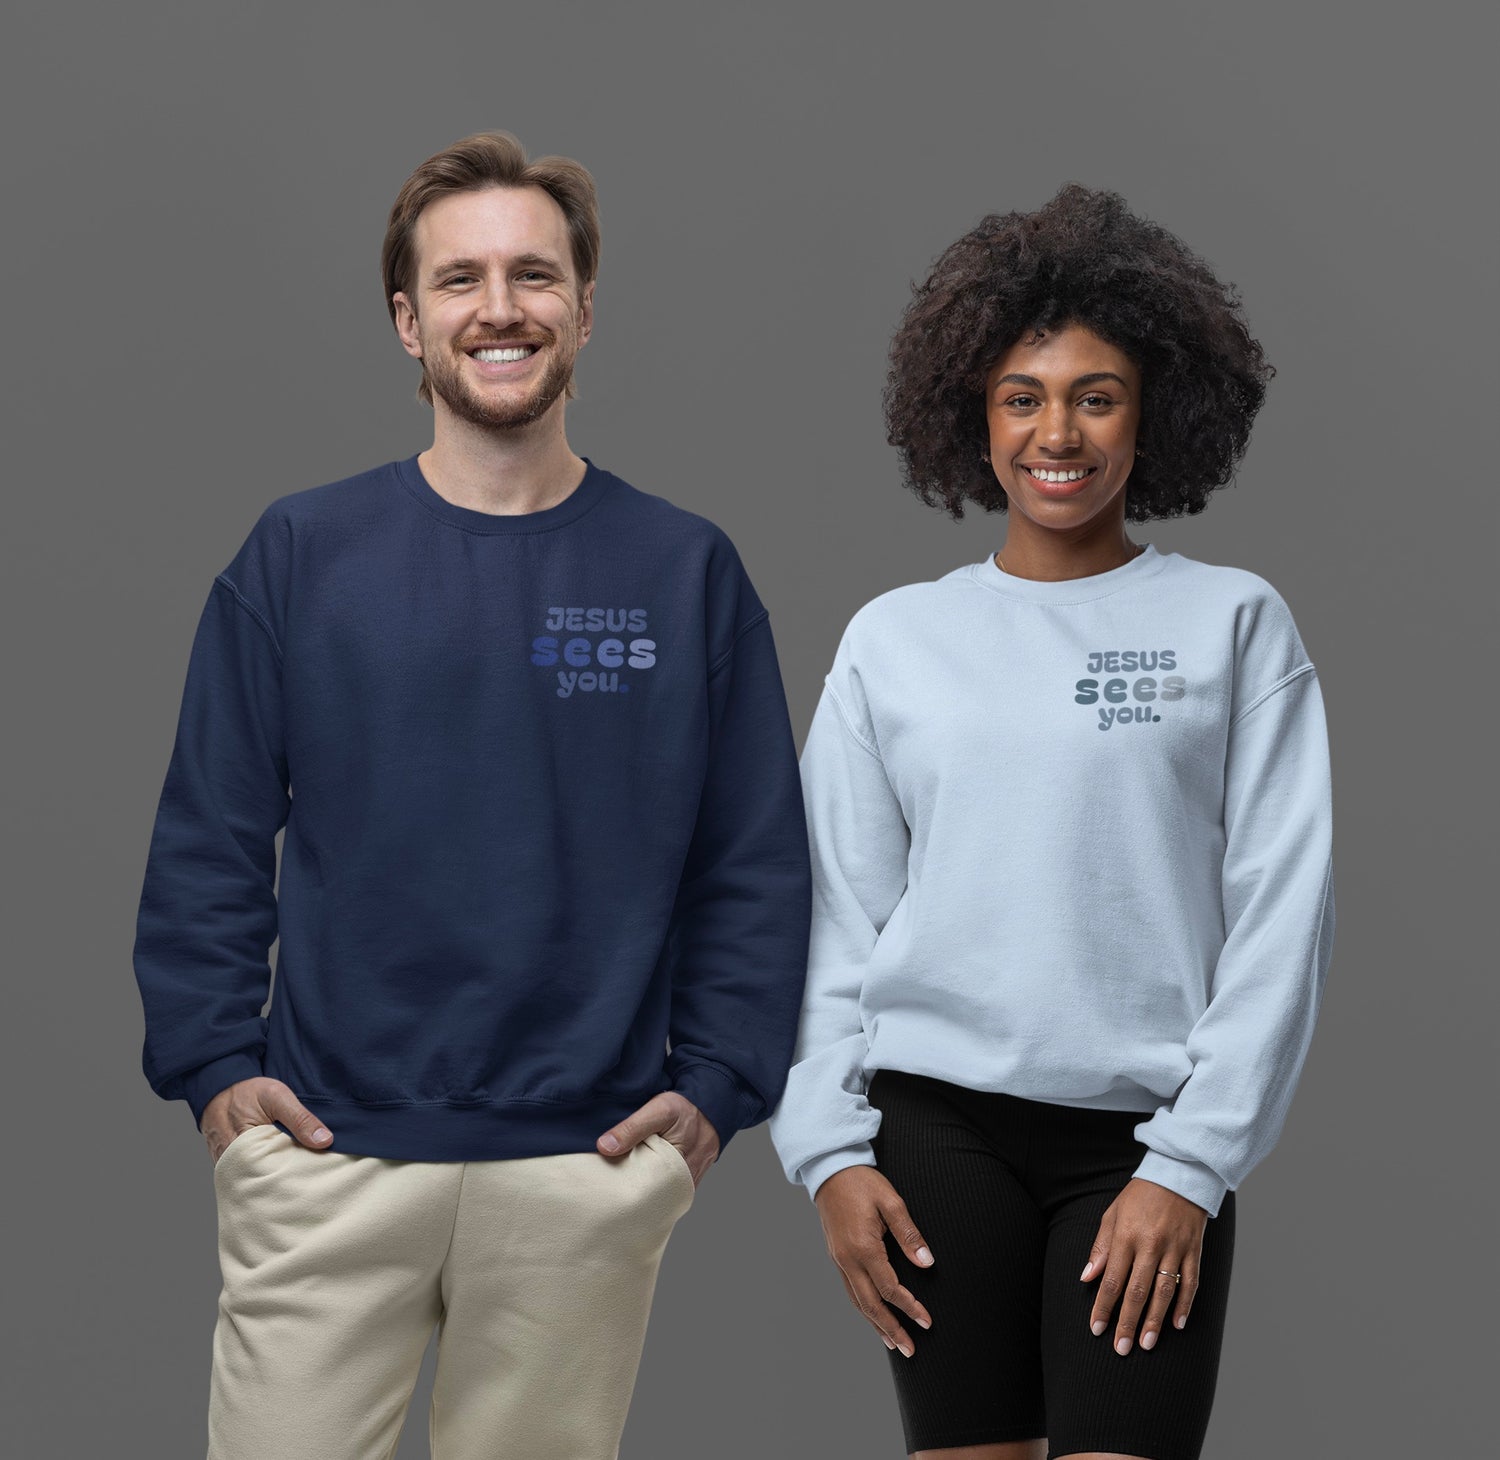 "JESUS SEES YOU" CREW COLLECTION